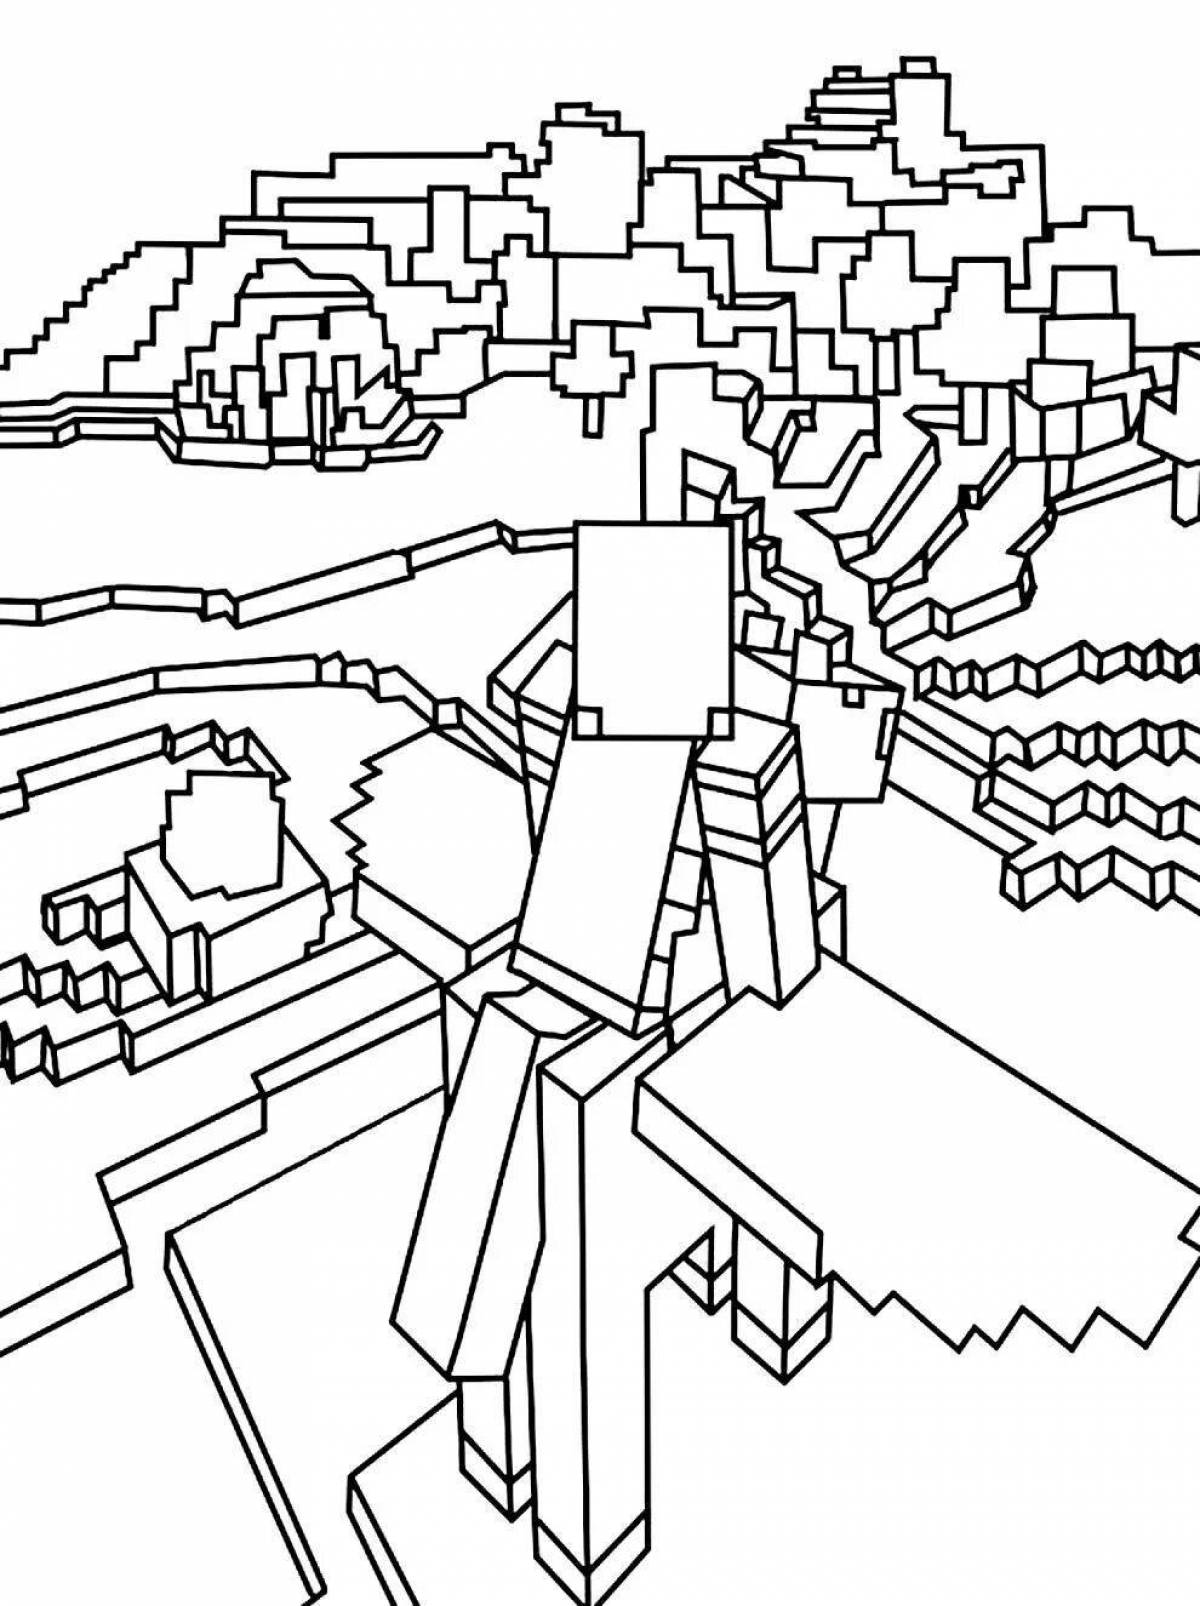 Colorful charm minecraft villagers coloring page